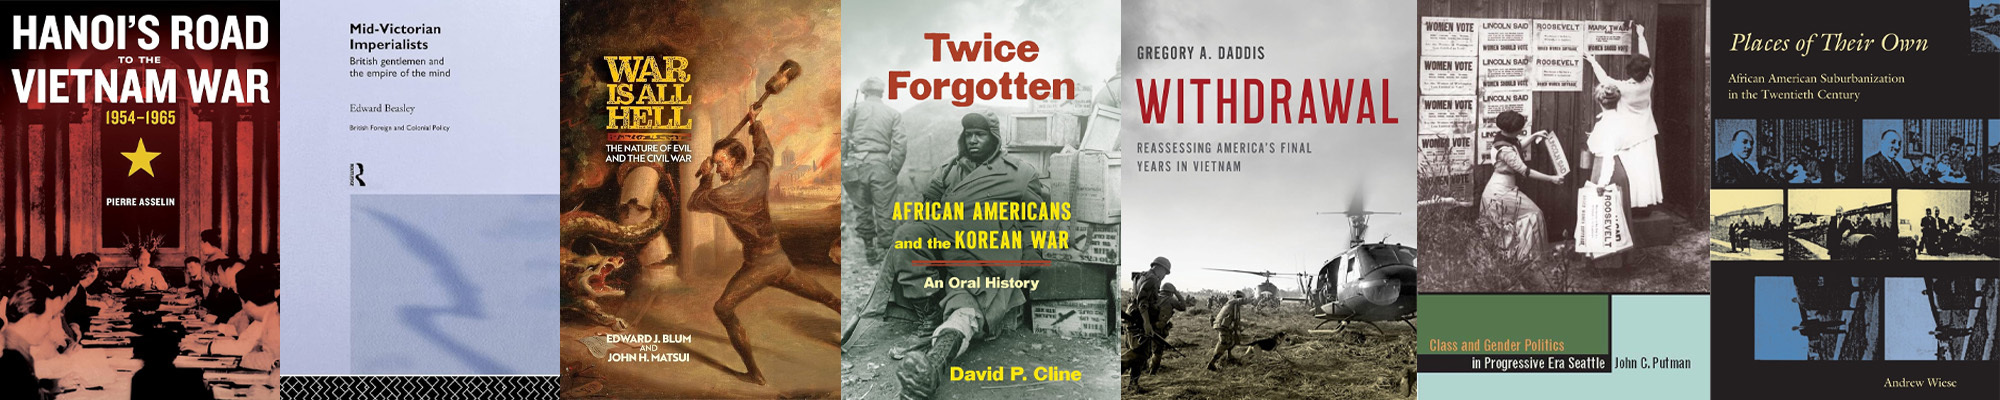 book covers: Pierre (Hanoi’s Road to the Vietnam War), Beasley (Mid-Victorian Imperialists), Blum (War is All Hell), David (Twice Forgotten), Greg (Withdrawal), Putman (Class and Gender Politics in Progressive-Era Seattle), and Andy (Places of Their Own)